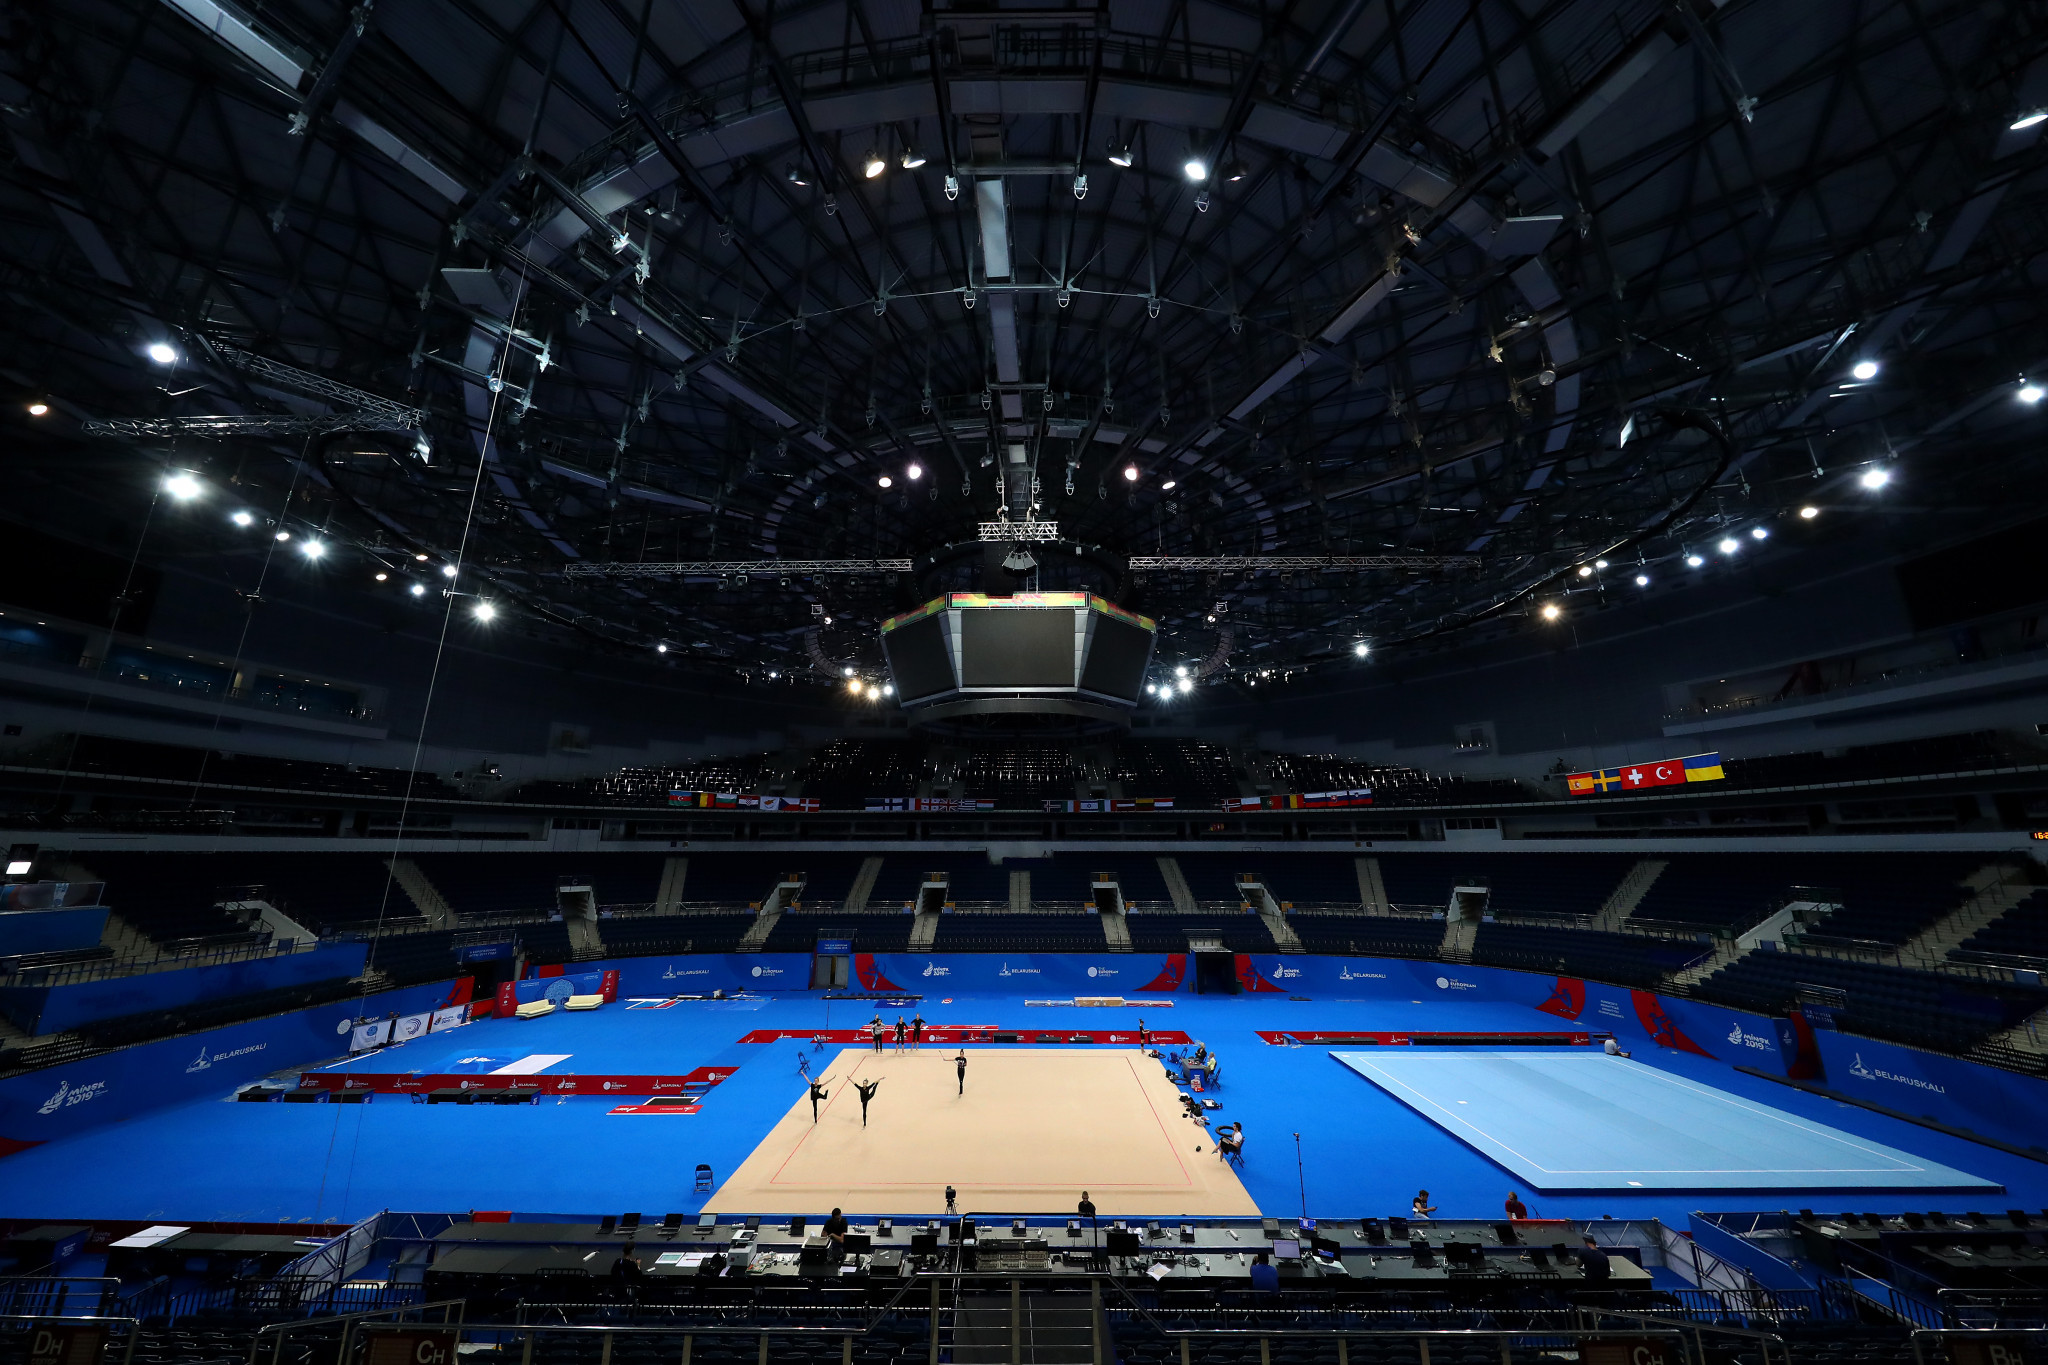 European Gymnastics and the EOC are "working towards" bringing gymnastics back to the European Games ©Getty Images